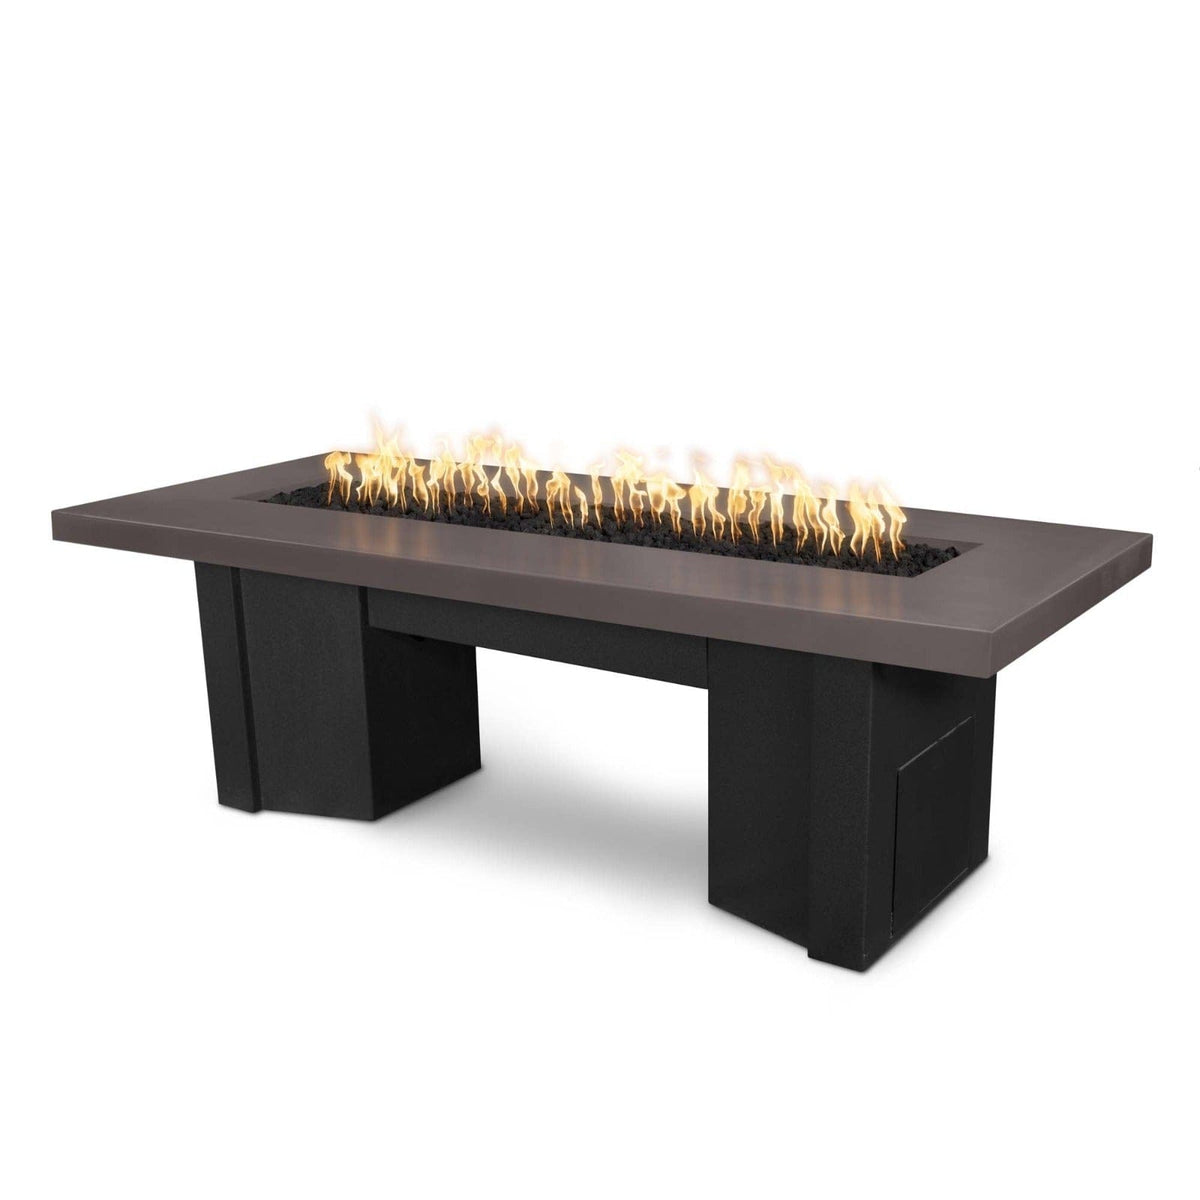 The Outdoor Plus Fire Features Chestnut (-CST) / Black Powder Coated Steel (-BLK) The Outdoor Plus 60&quot; Alameda Fire Table Smooth Concrete in Natural Gas - Flame Sense System with Push Button Spark Igniter / OPT-ALMGFRC60FSEN-NG